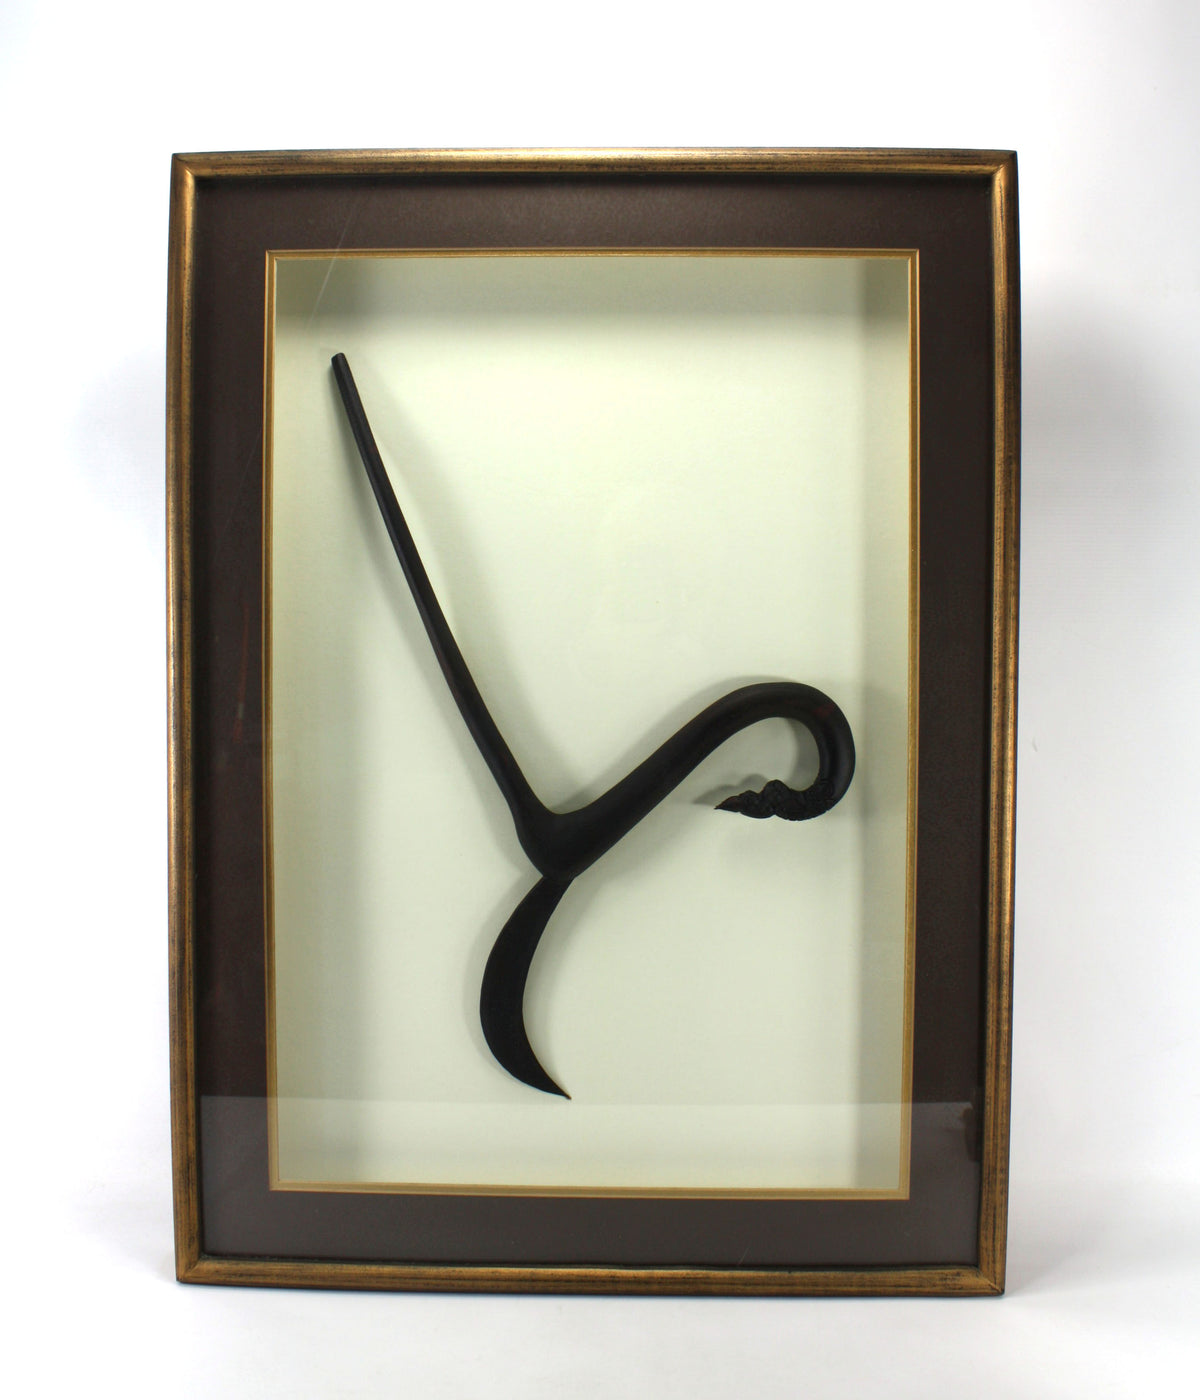 Cambodian Rice Sickle, Framed Display, 76cm x 56cm. Pair available.